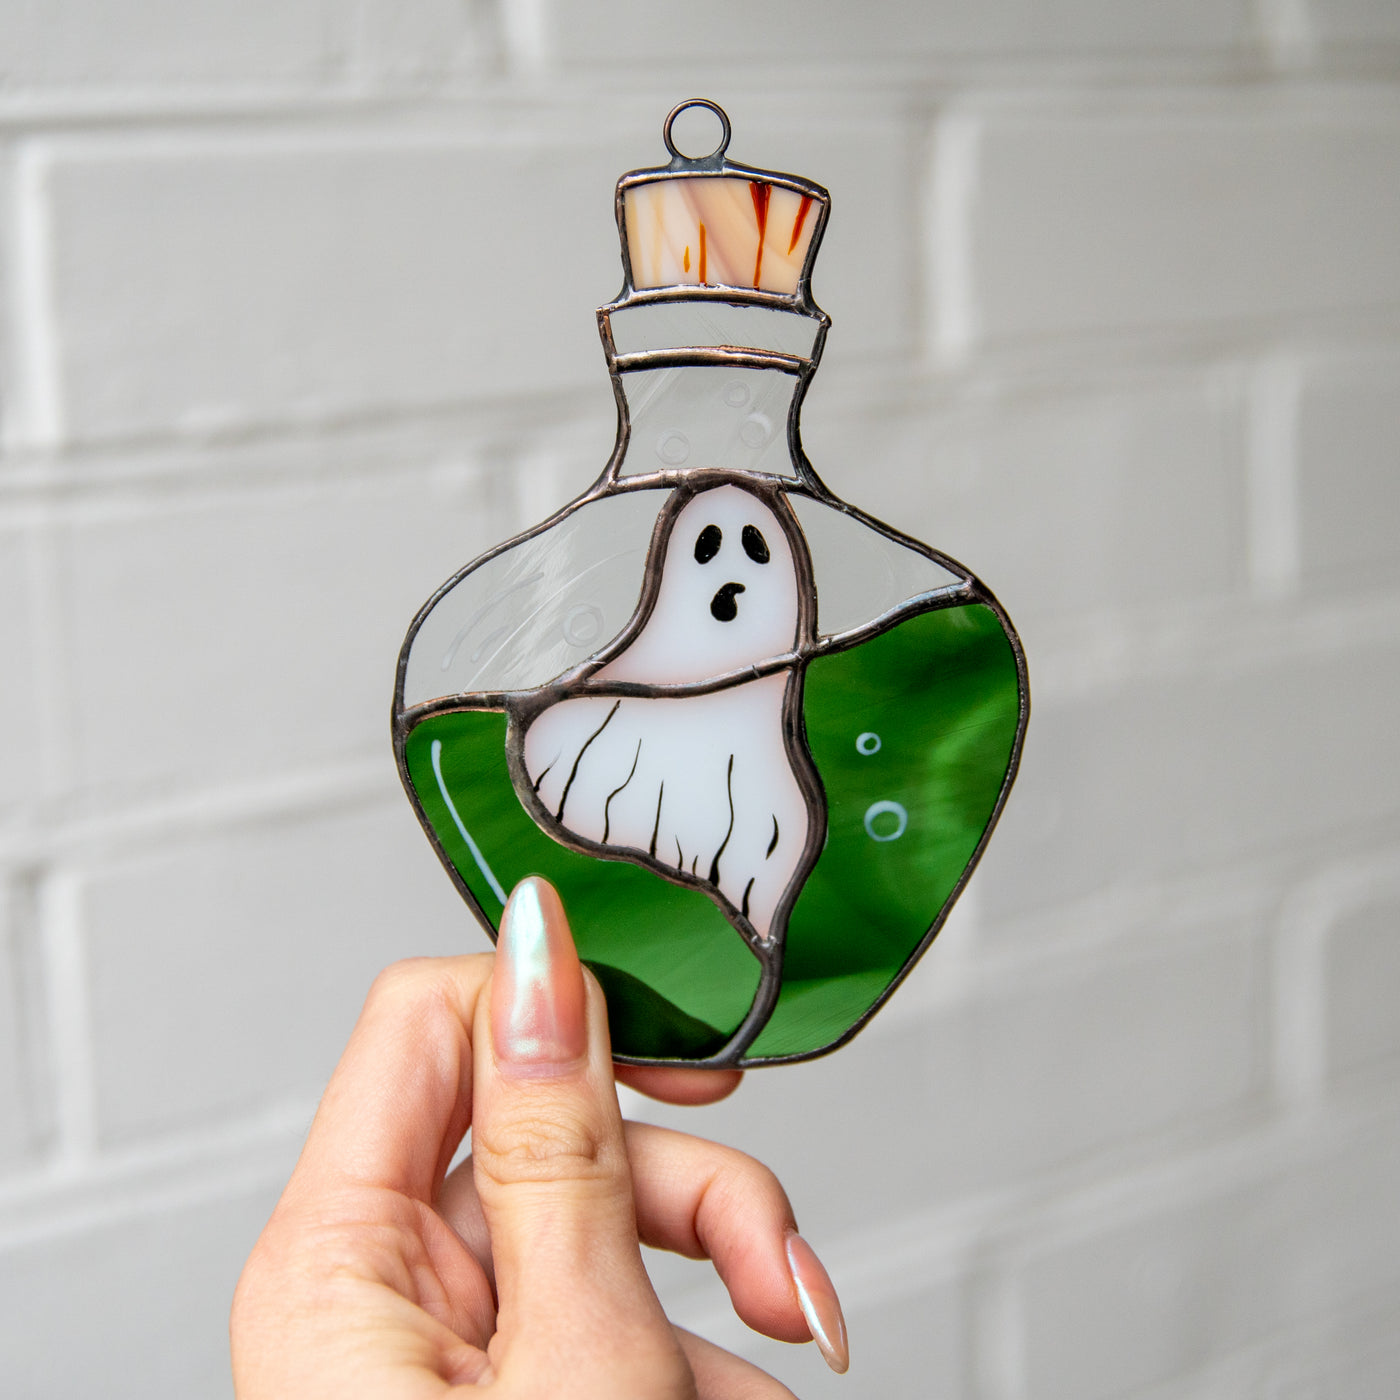 Spooky Halloween suncatcher of stained glass ghost in the bottle